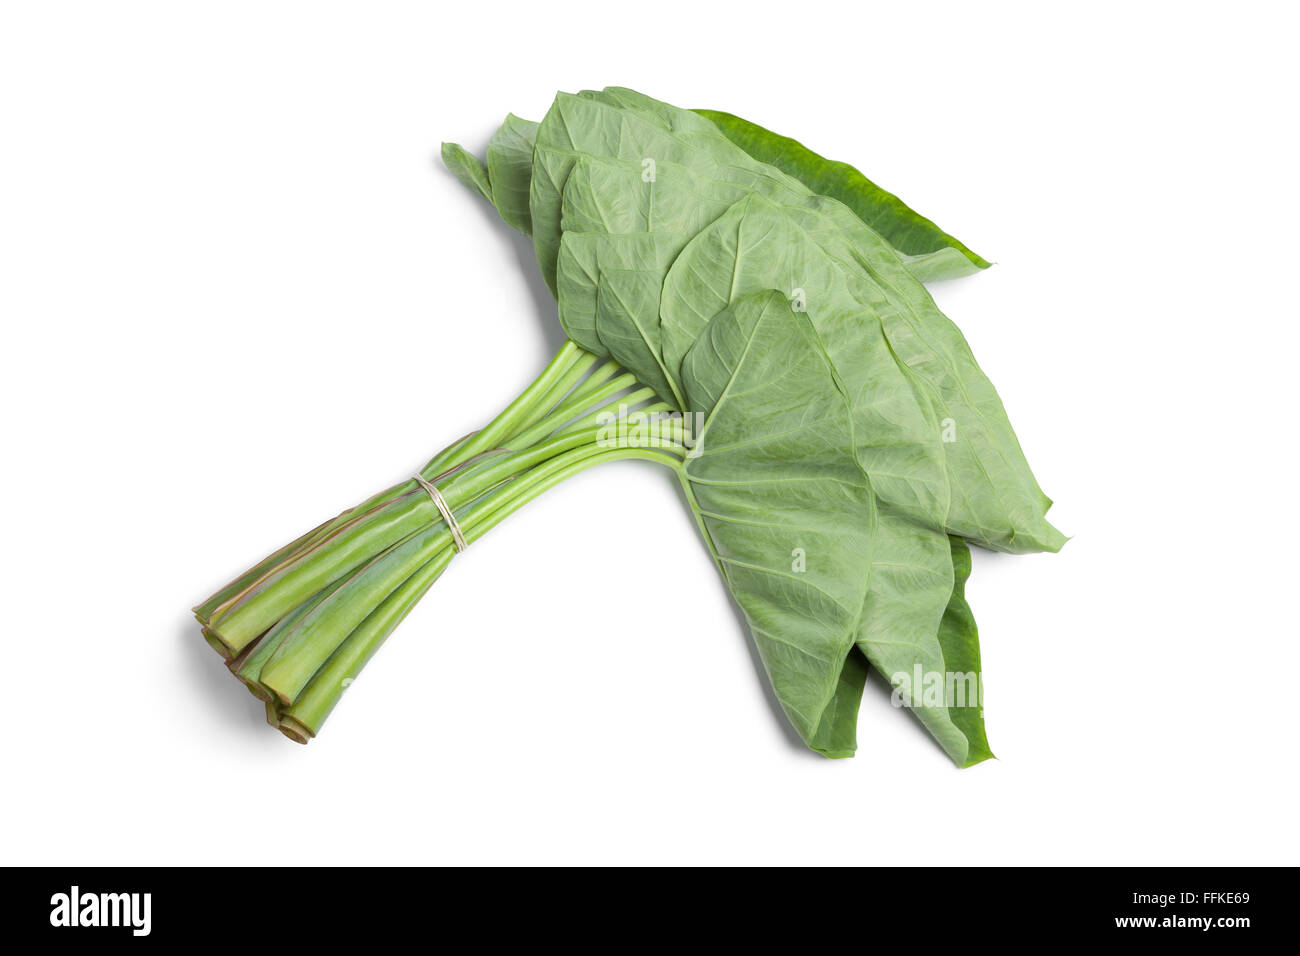 Bunch of whole fresh Taro leaves on white background Stock Photo